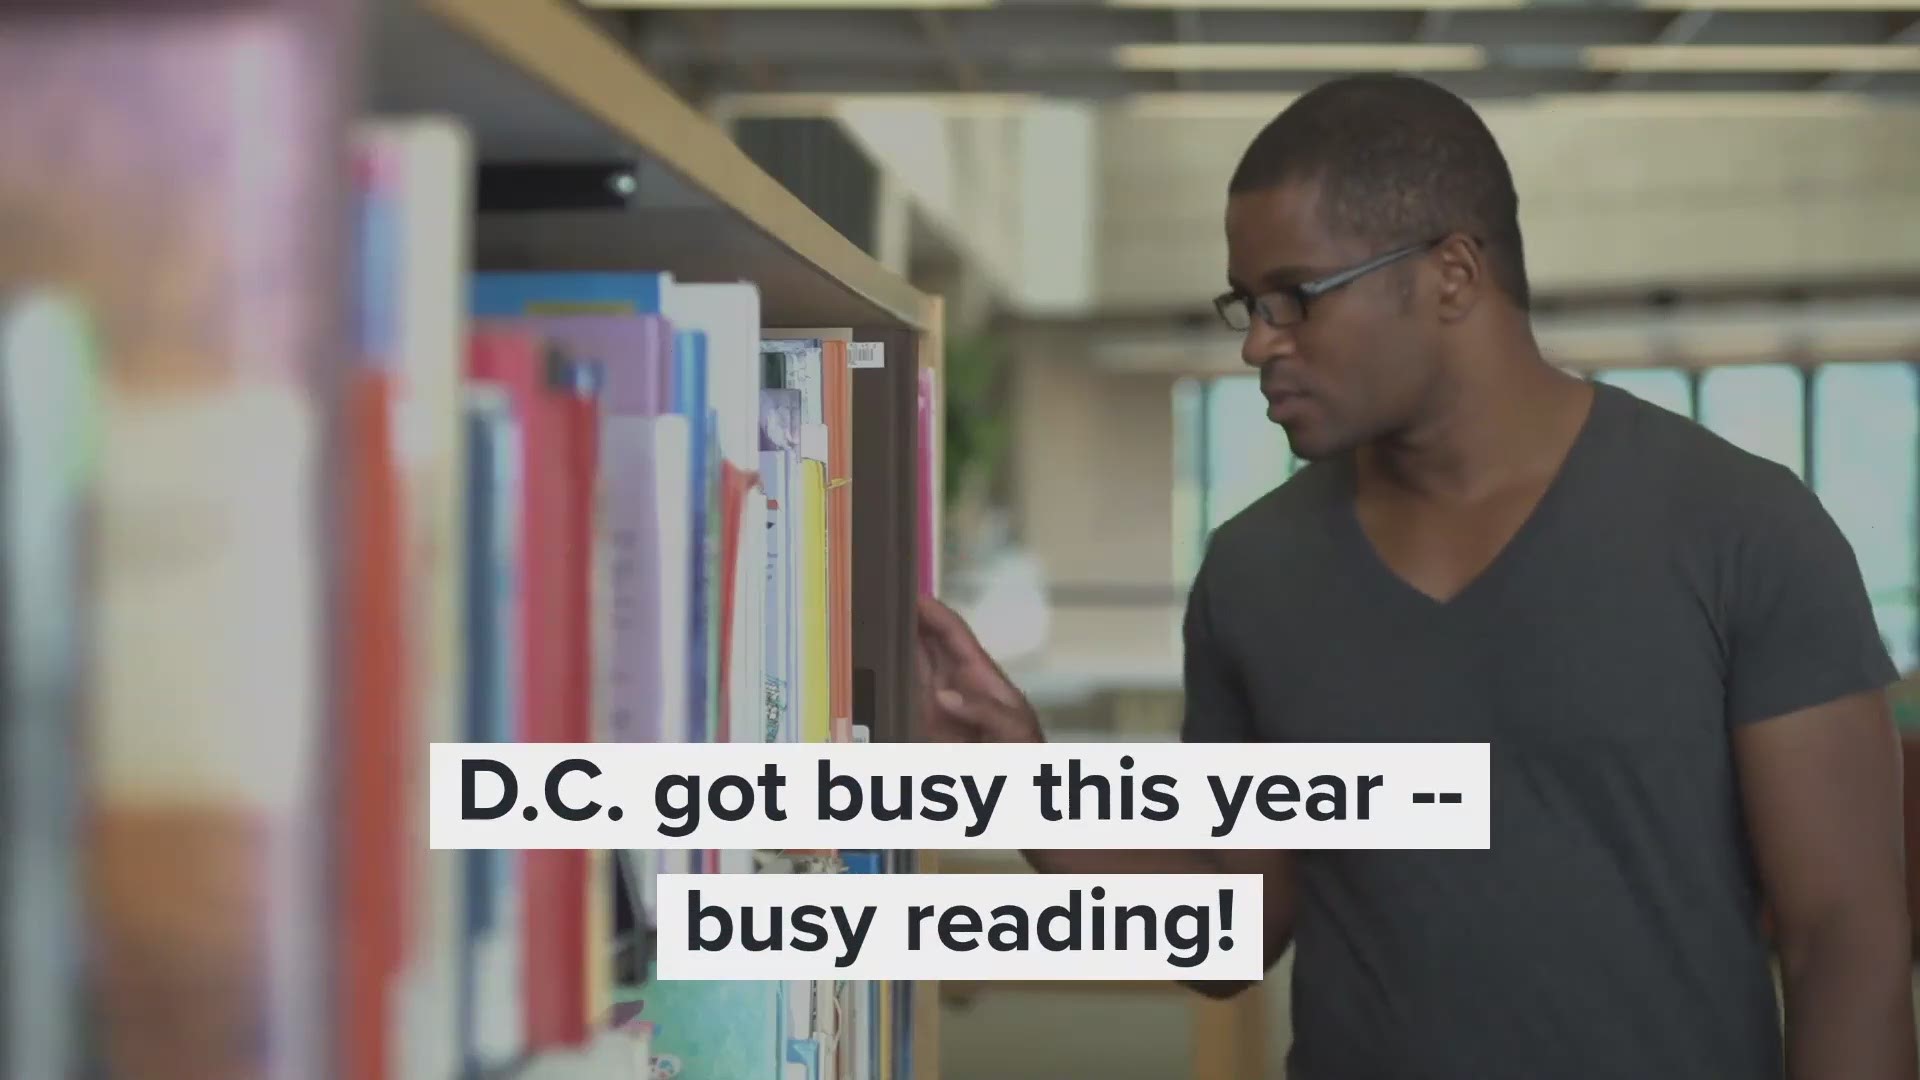 The D.C. Library released their list of the top 10 most checked out items, including fiction books, nonfiction audiobooks and magazine downloads.